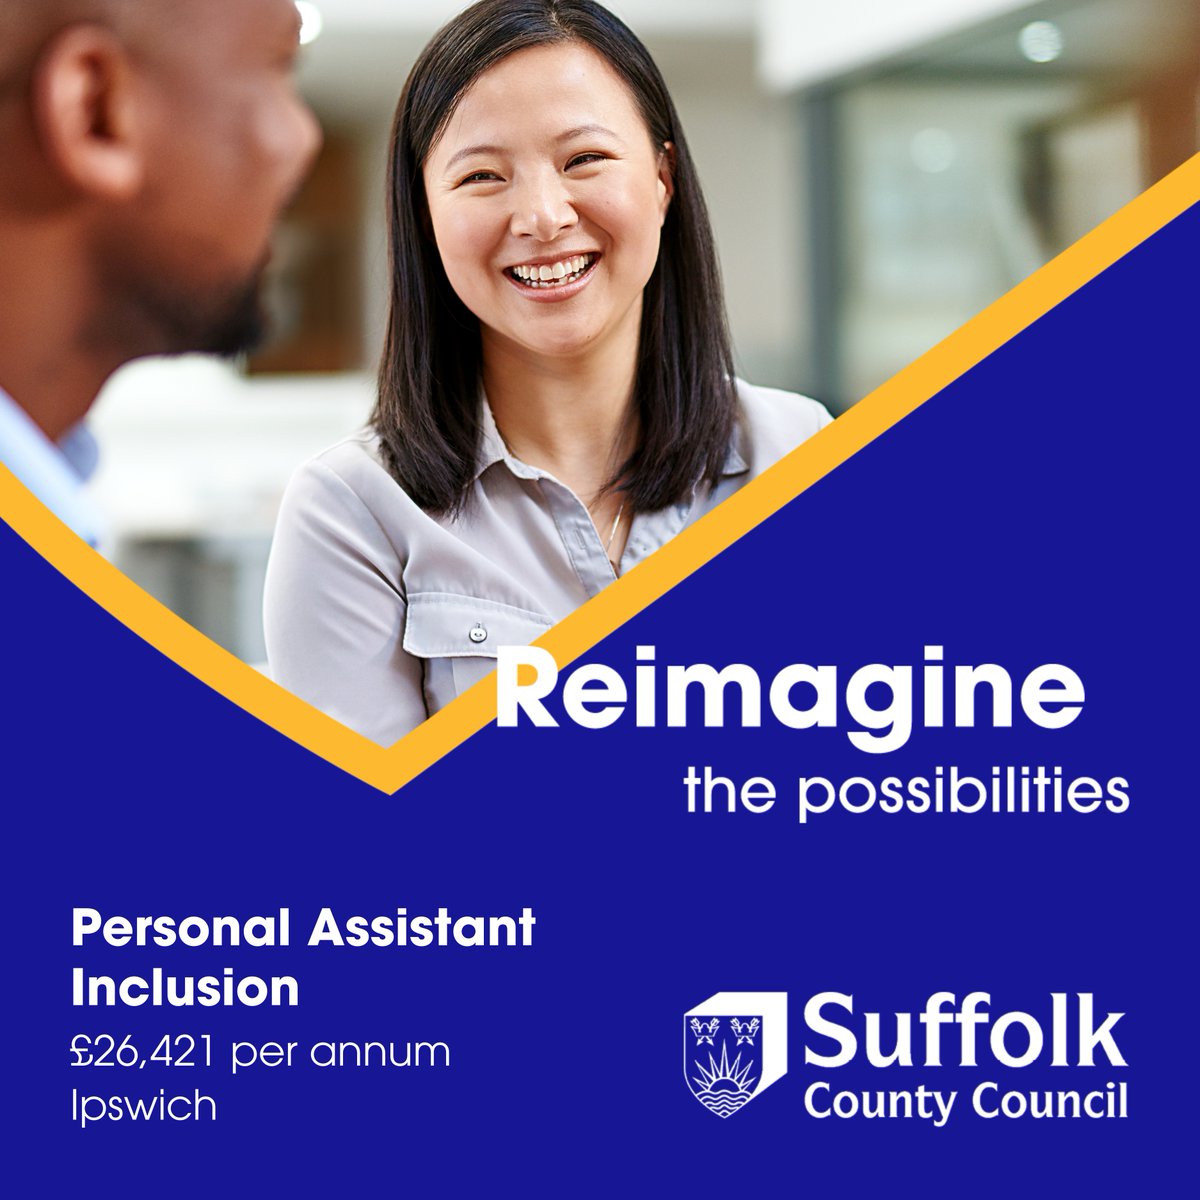 Personal Assistant
@suffolkcc - Ipswich IP1 2BX / Hybrid 
£26,421 pa (pro rata if part time)
37 hpw, Flexible working options, Permanent

For more info and to apply for this job, visit:
suffolkjobsdirect.org/#en/sites/CX_1…

#SuffolkJobs #suffolkjobsdirect